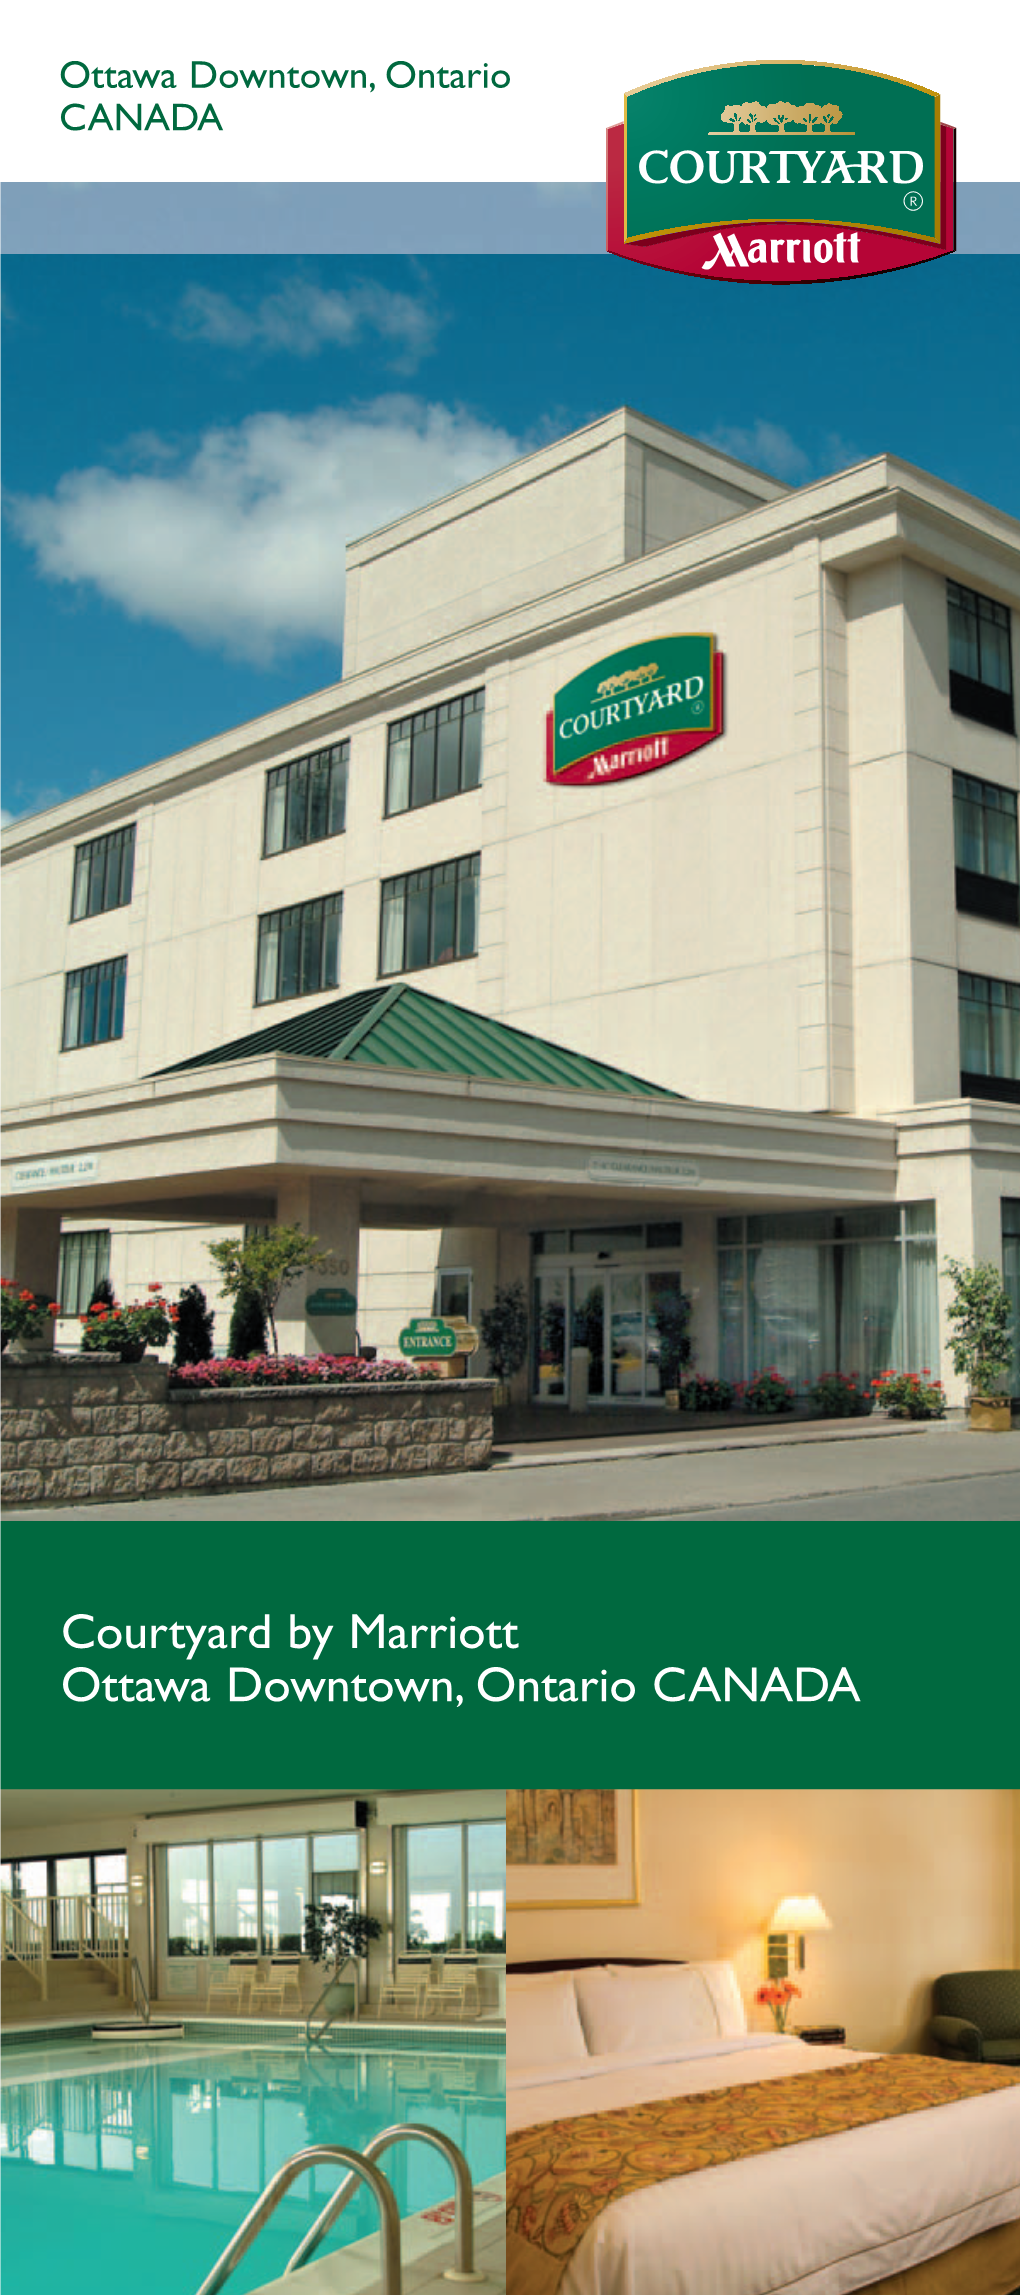 Courtyard by Marriott Ottawa Downtown, Ontario CANADA 148030-Rackcard E.Qxd:CM 6/7/07 11:20 AM Page 2